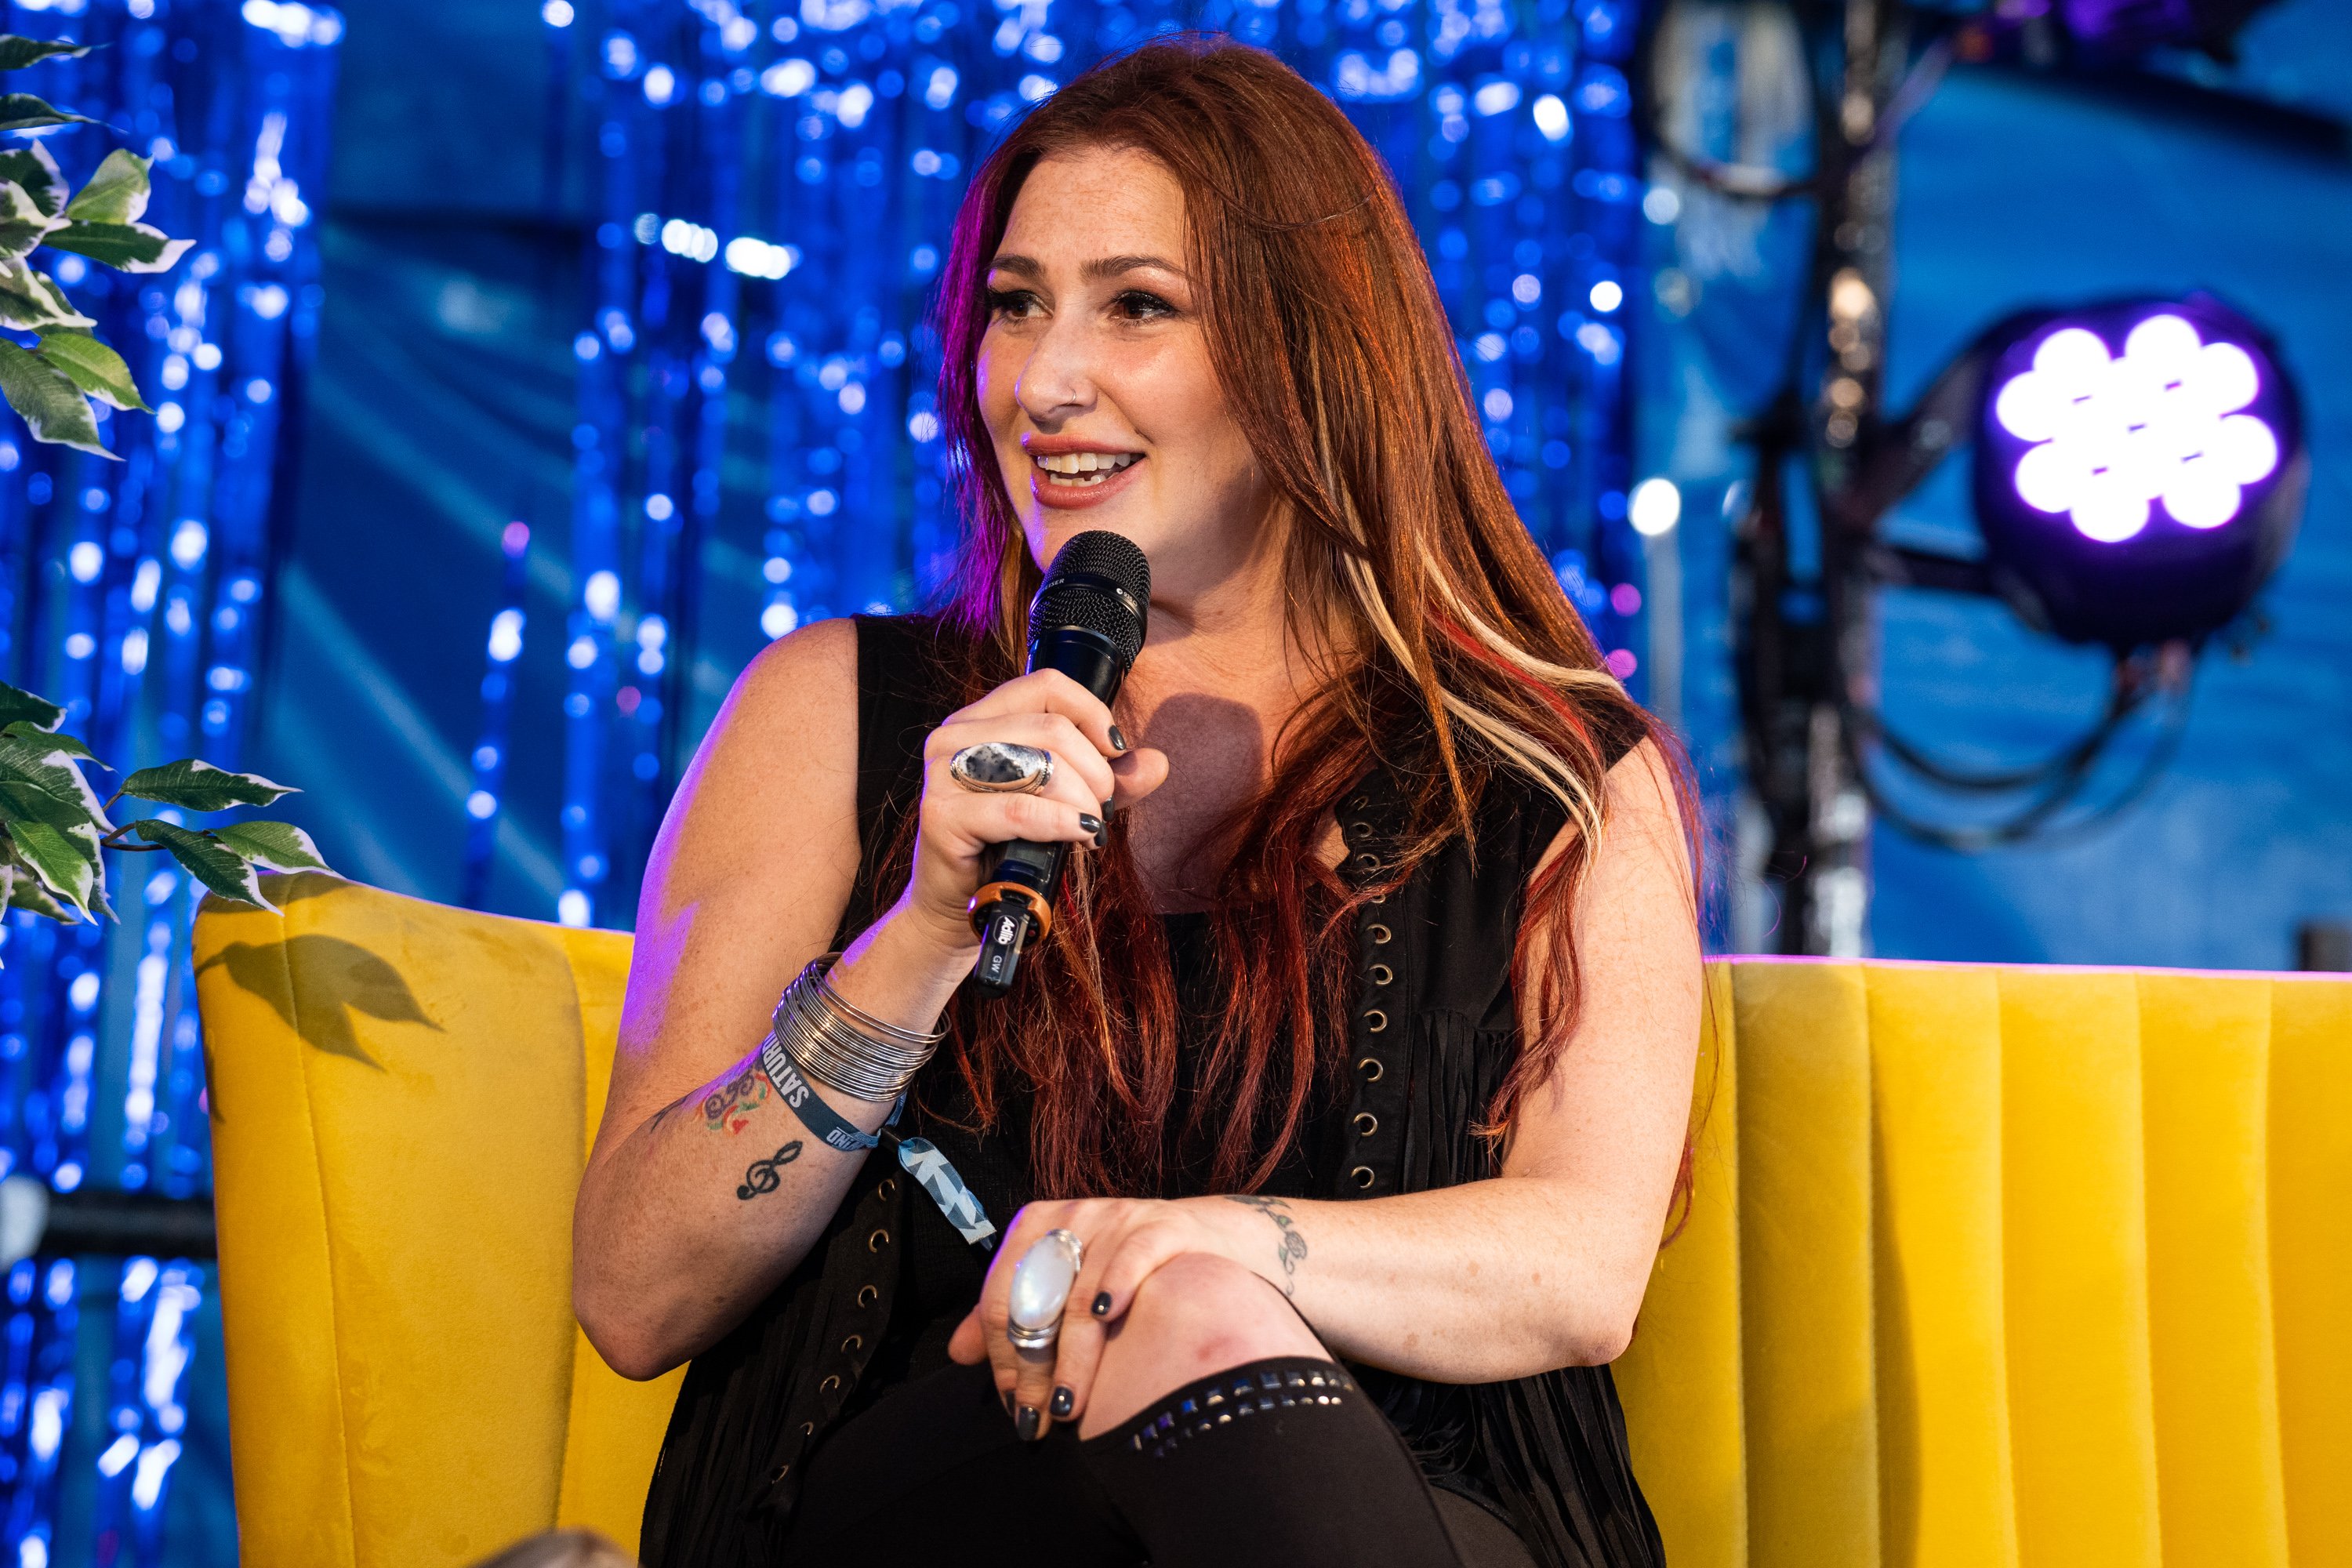  Tiffany is interviewed at Rewind South on August 17, 2019 in Henley-on-Thames, England | Photo: Getty Images